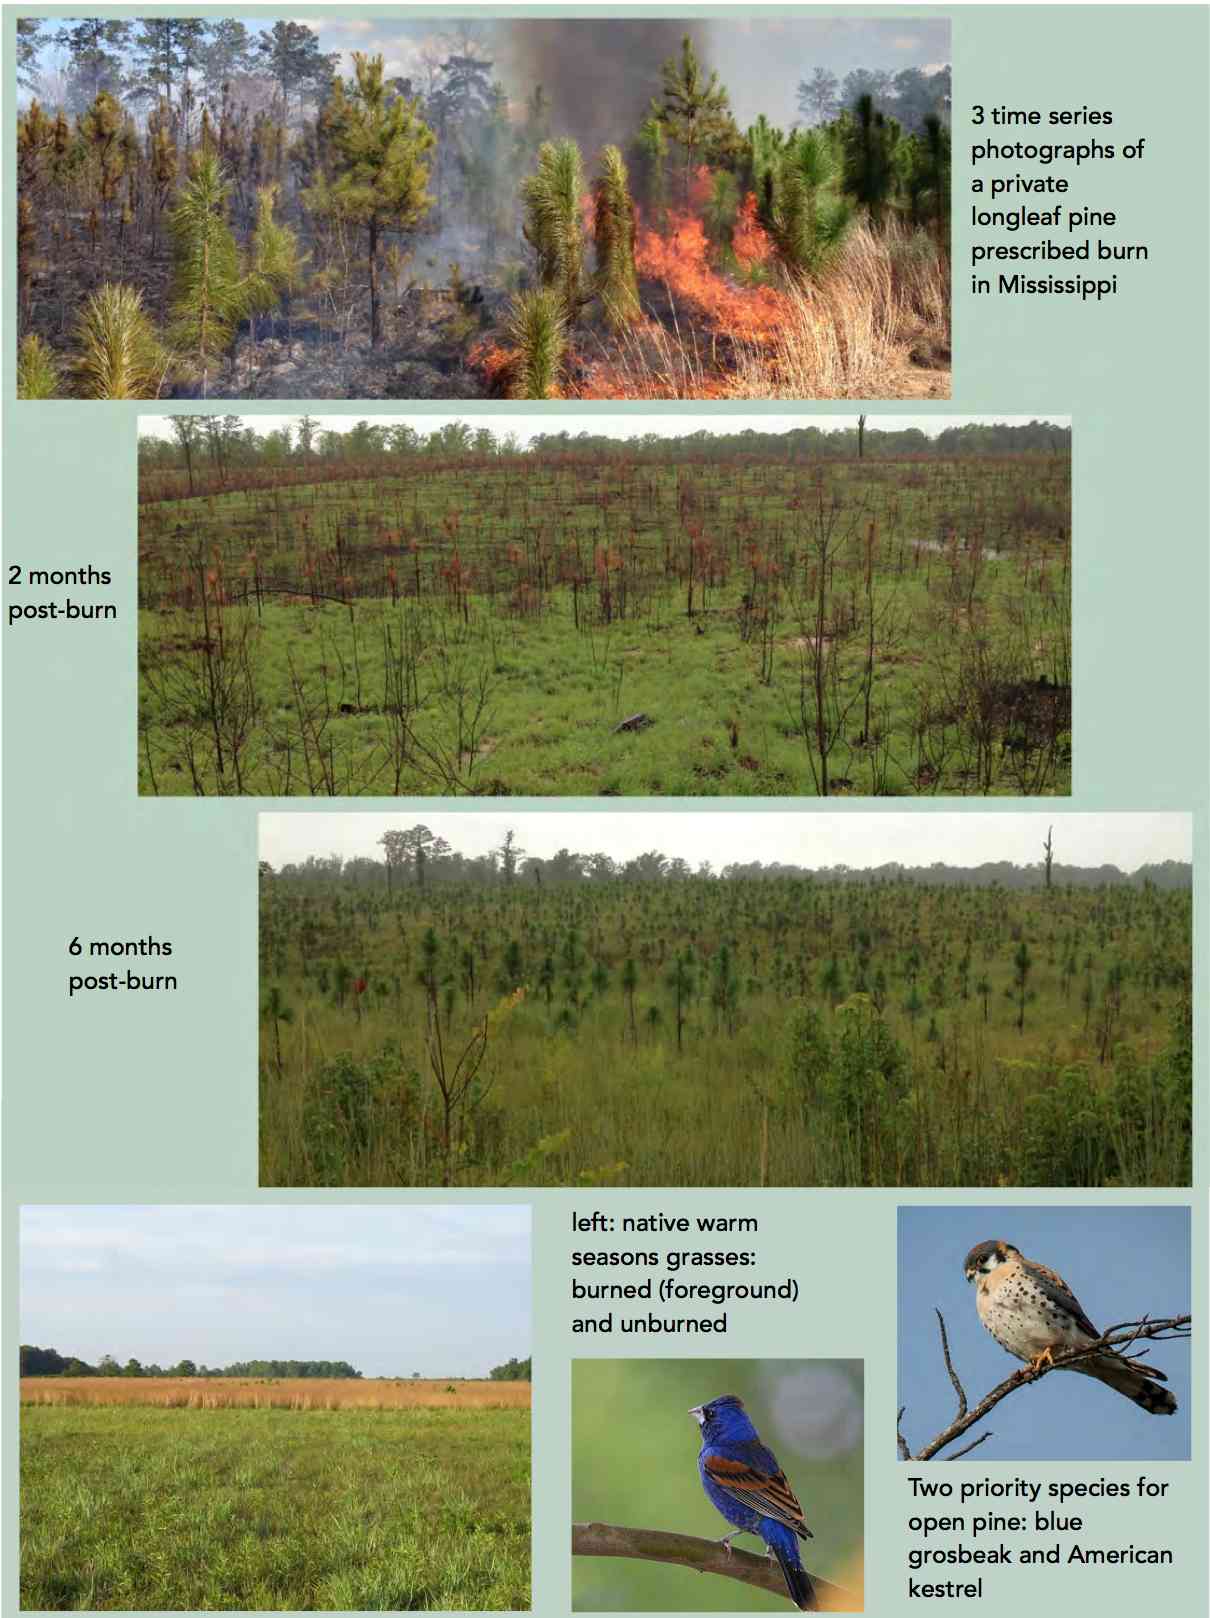 A Burning Issue: Prescribed Fire and Fire-adapted Habitats of the East Gulf Coastal Plain